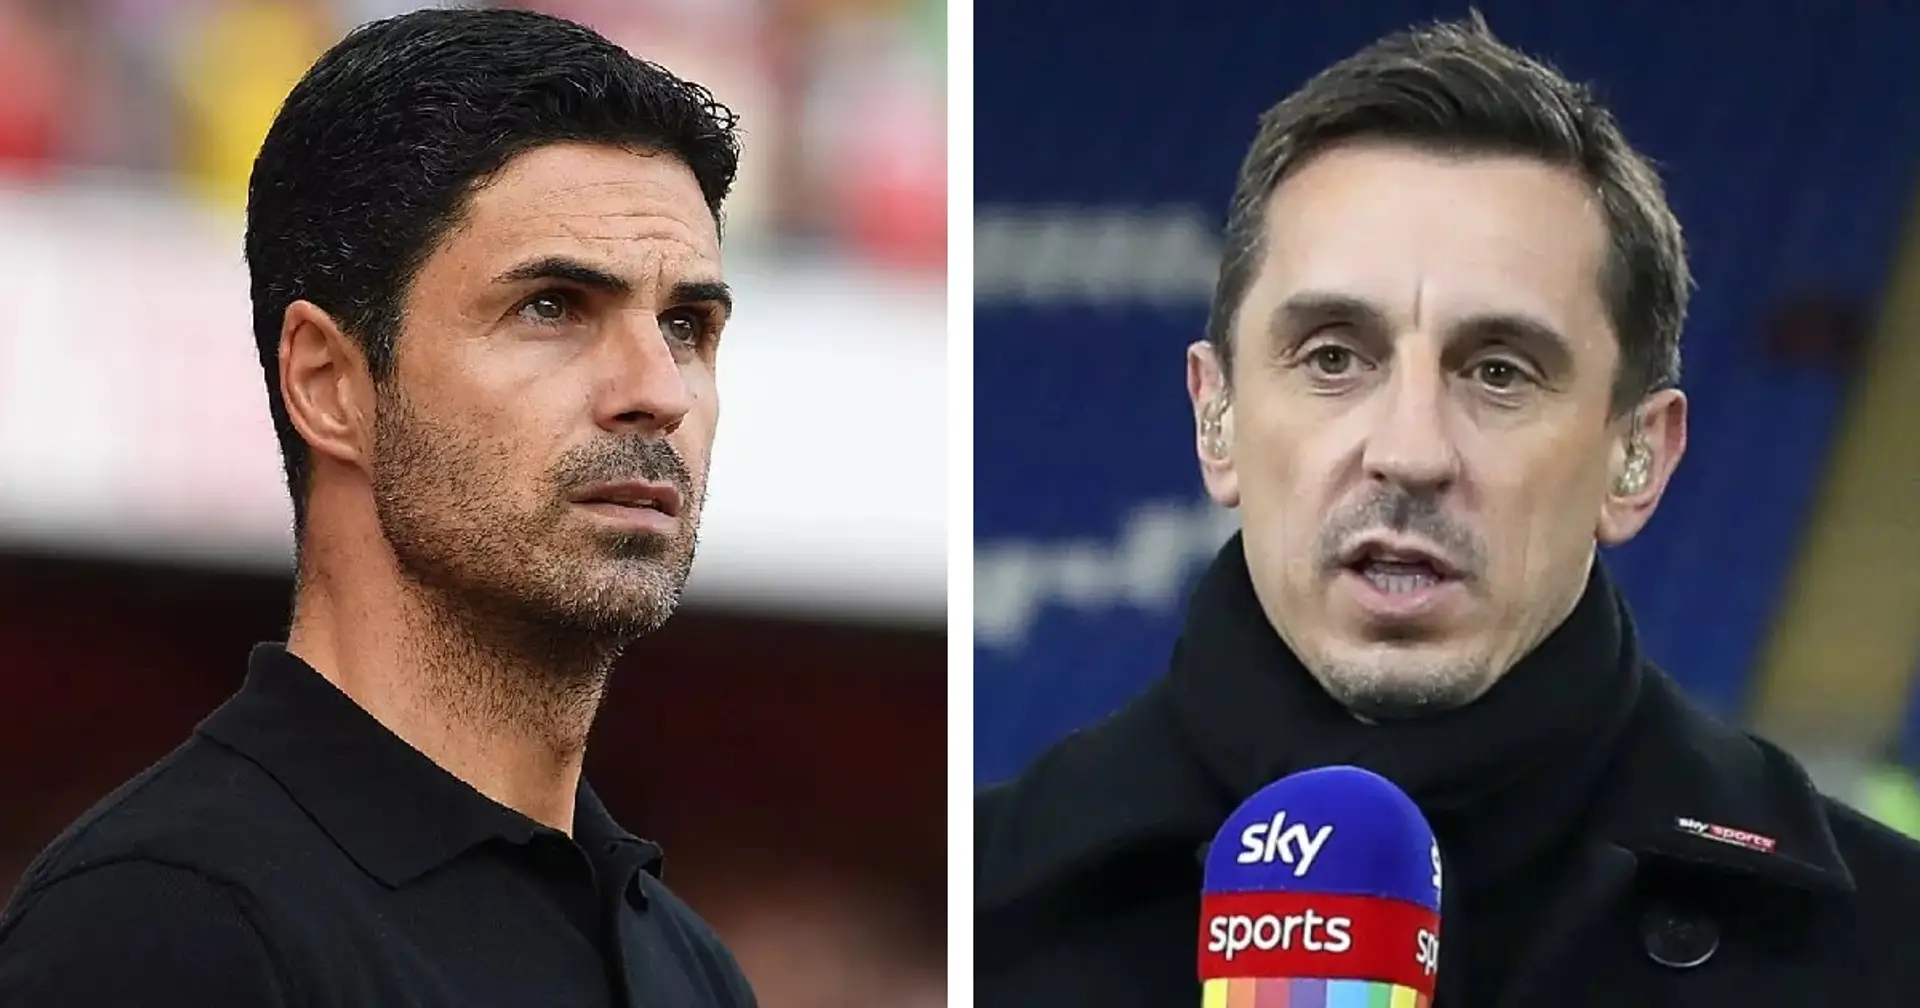 Gary Neville claims one Arsenal player looks beautiful but 'can't run'